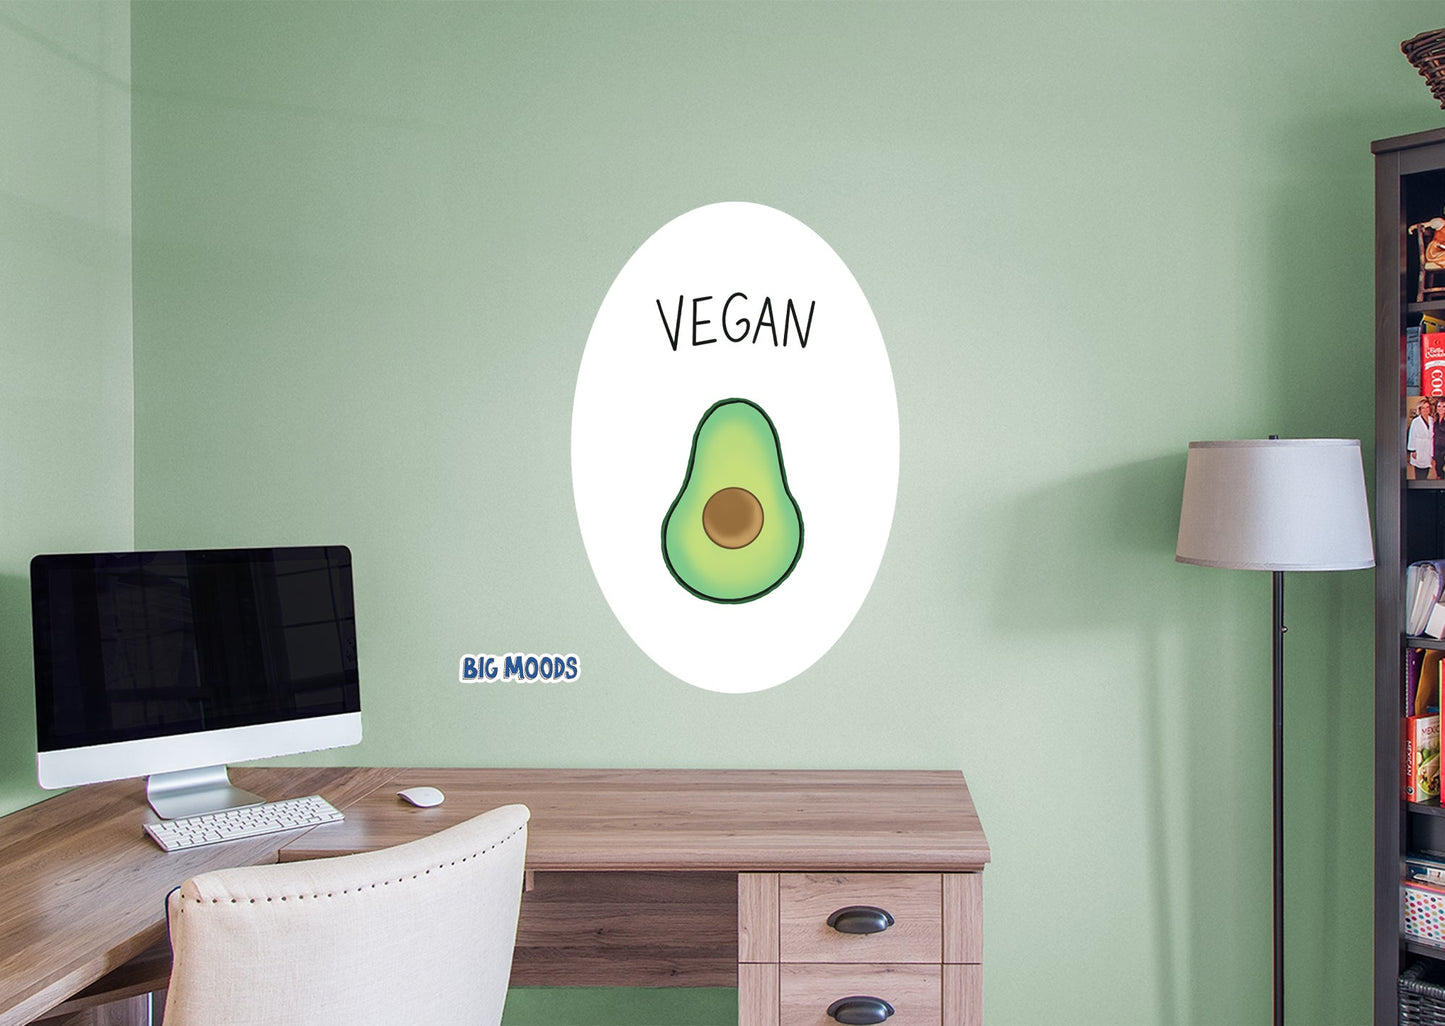 Vegan Avocado        - Officially Licensed Big Moods Removable     Adhesive Decal